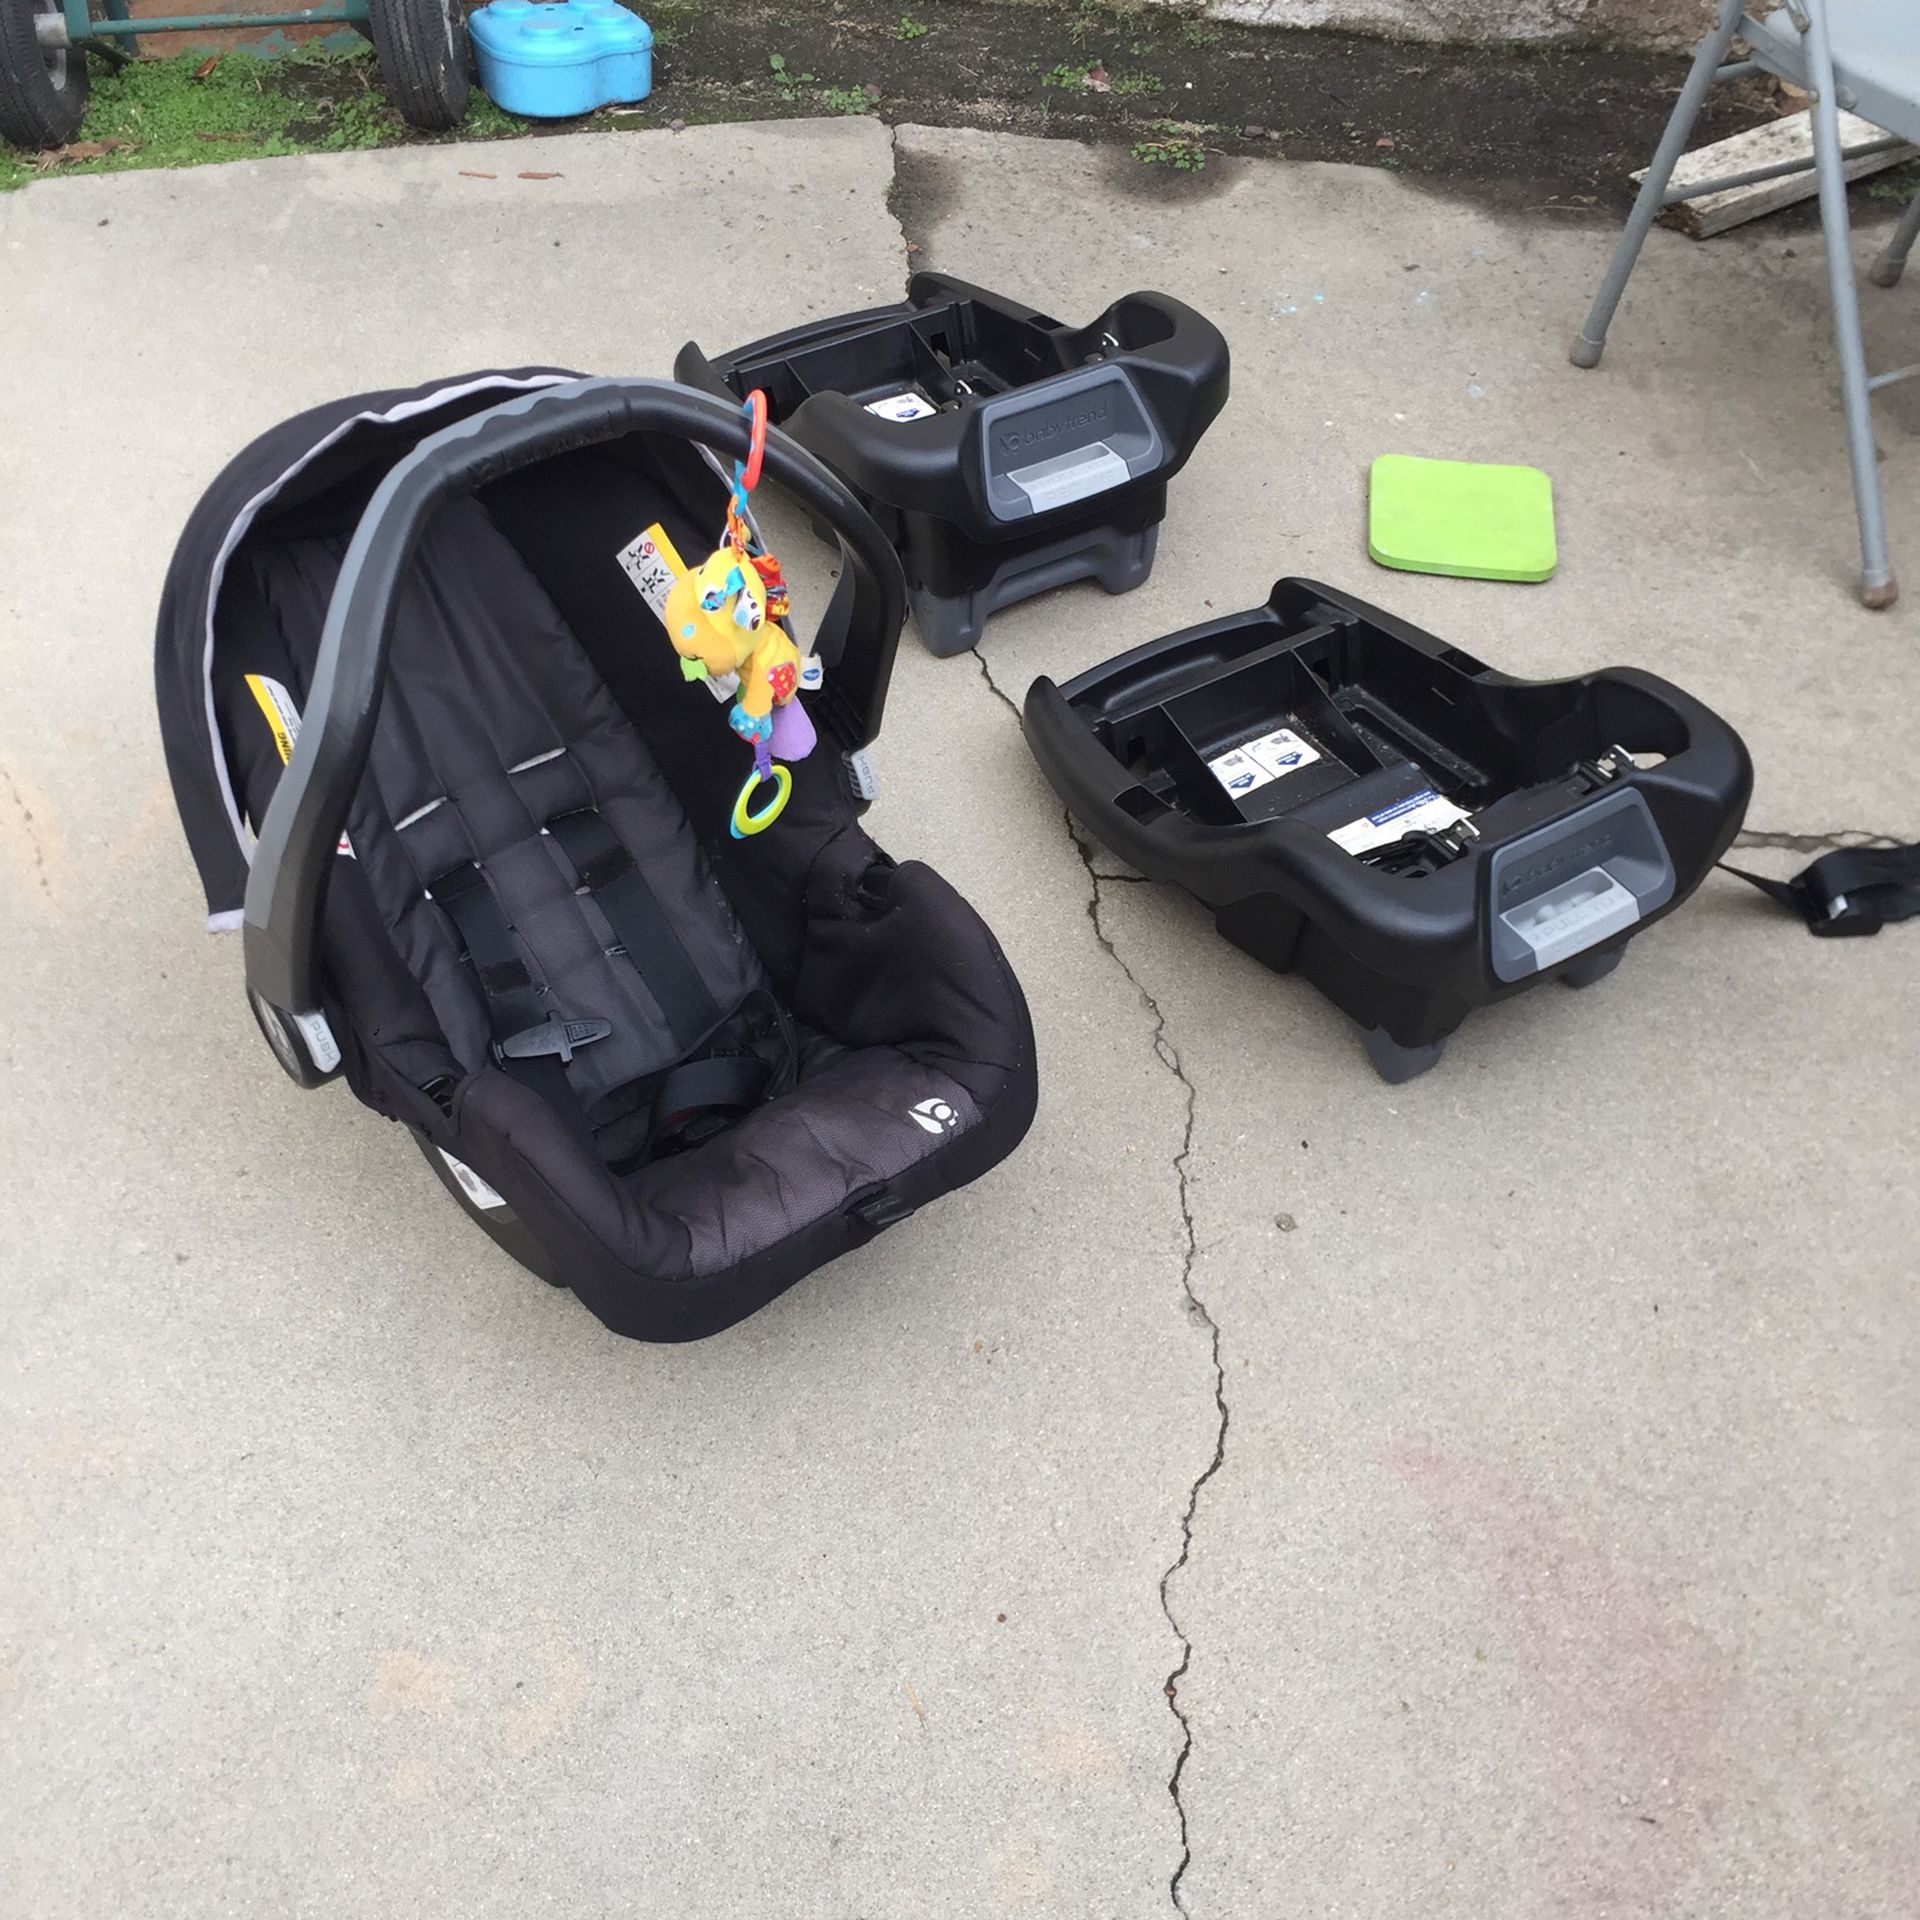 Babytrend 35lb Car Seat And Two Car Bases